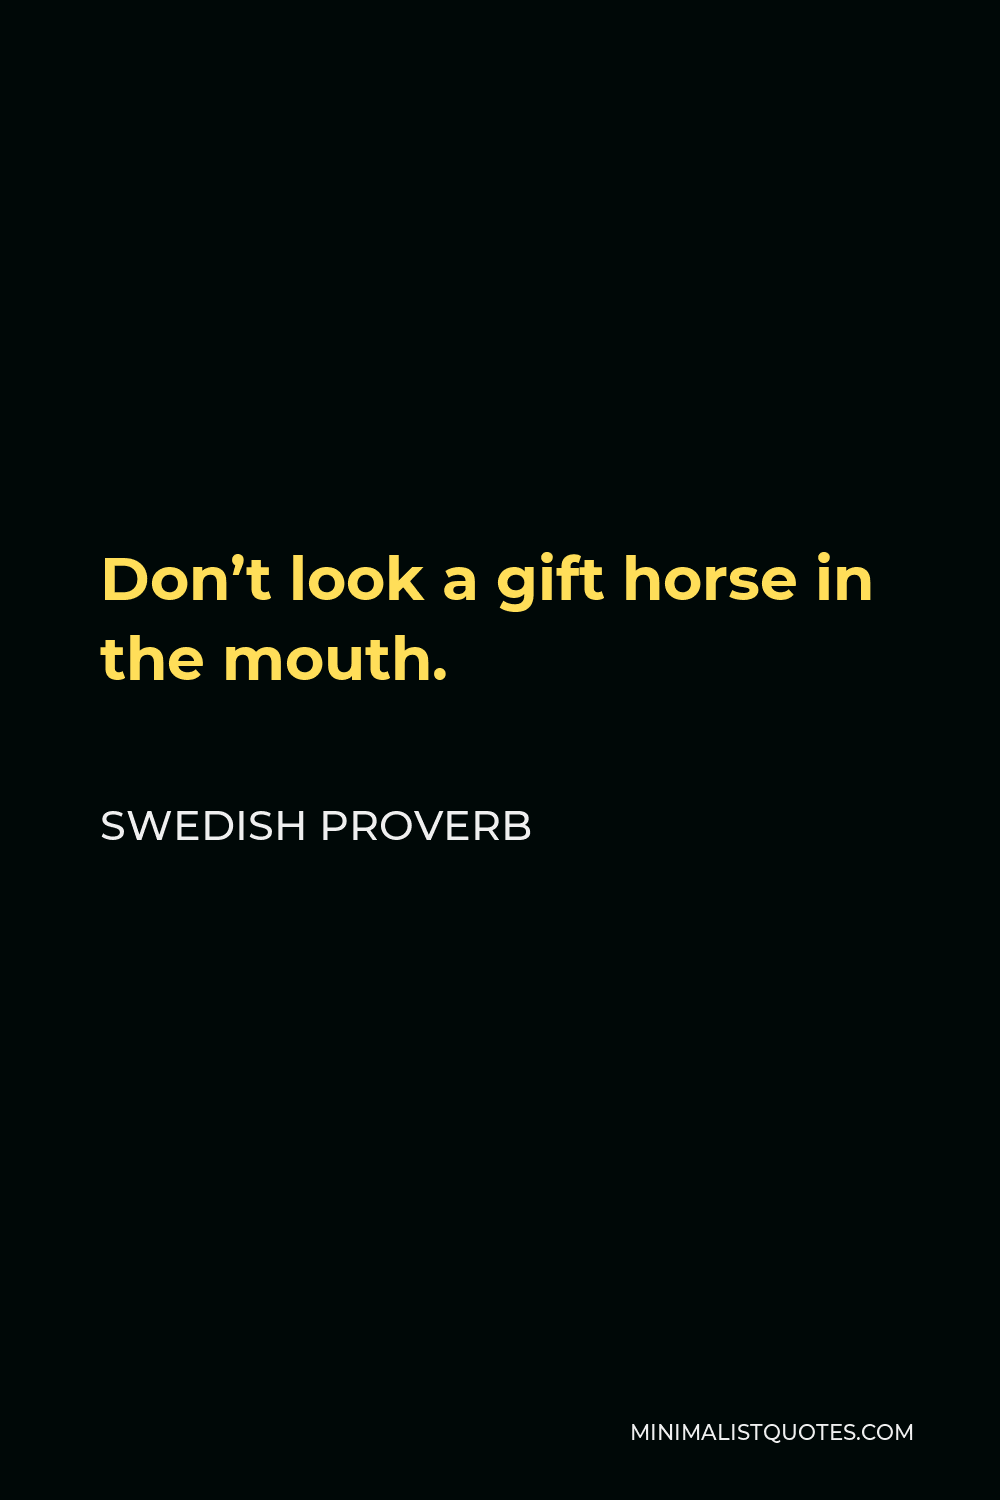 Swedish Proverb Quote - Don’t look a gift horse in the mouth.